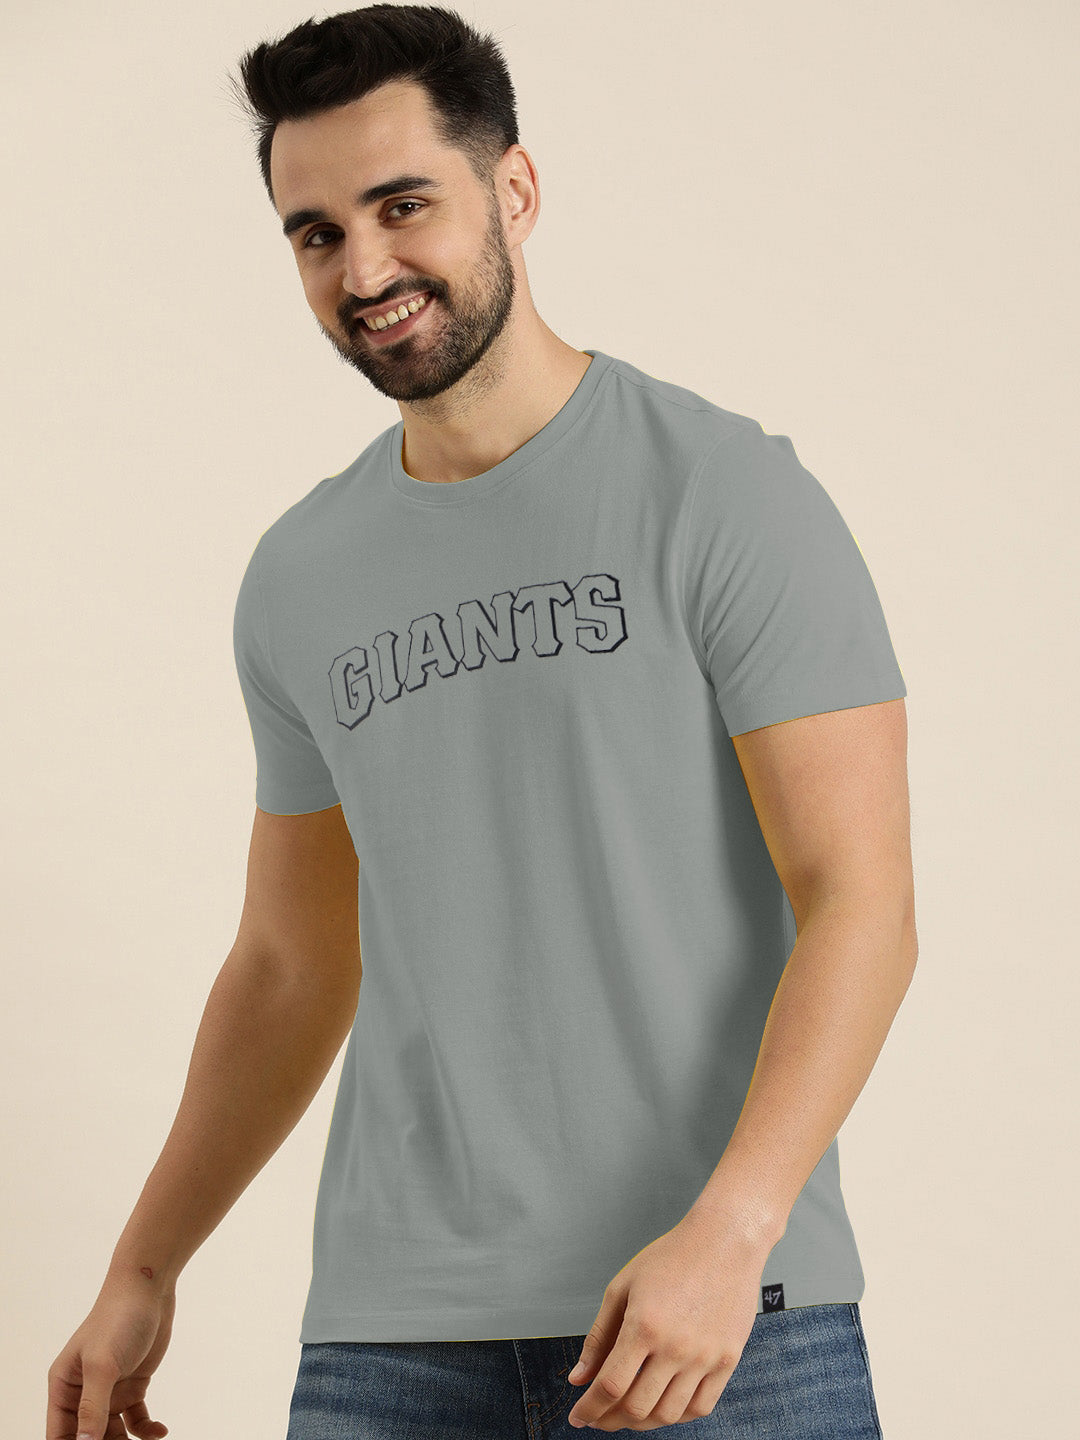 47 Single Jersey Crew Neck Tee Shirt For Men-Slate Grey with Print-BE917/BR13178